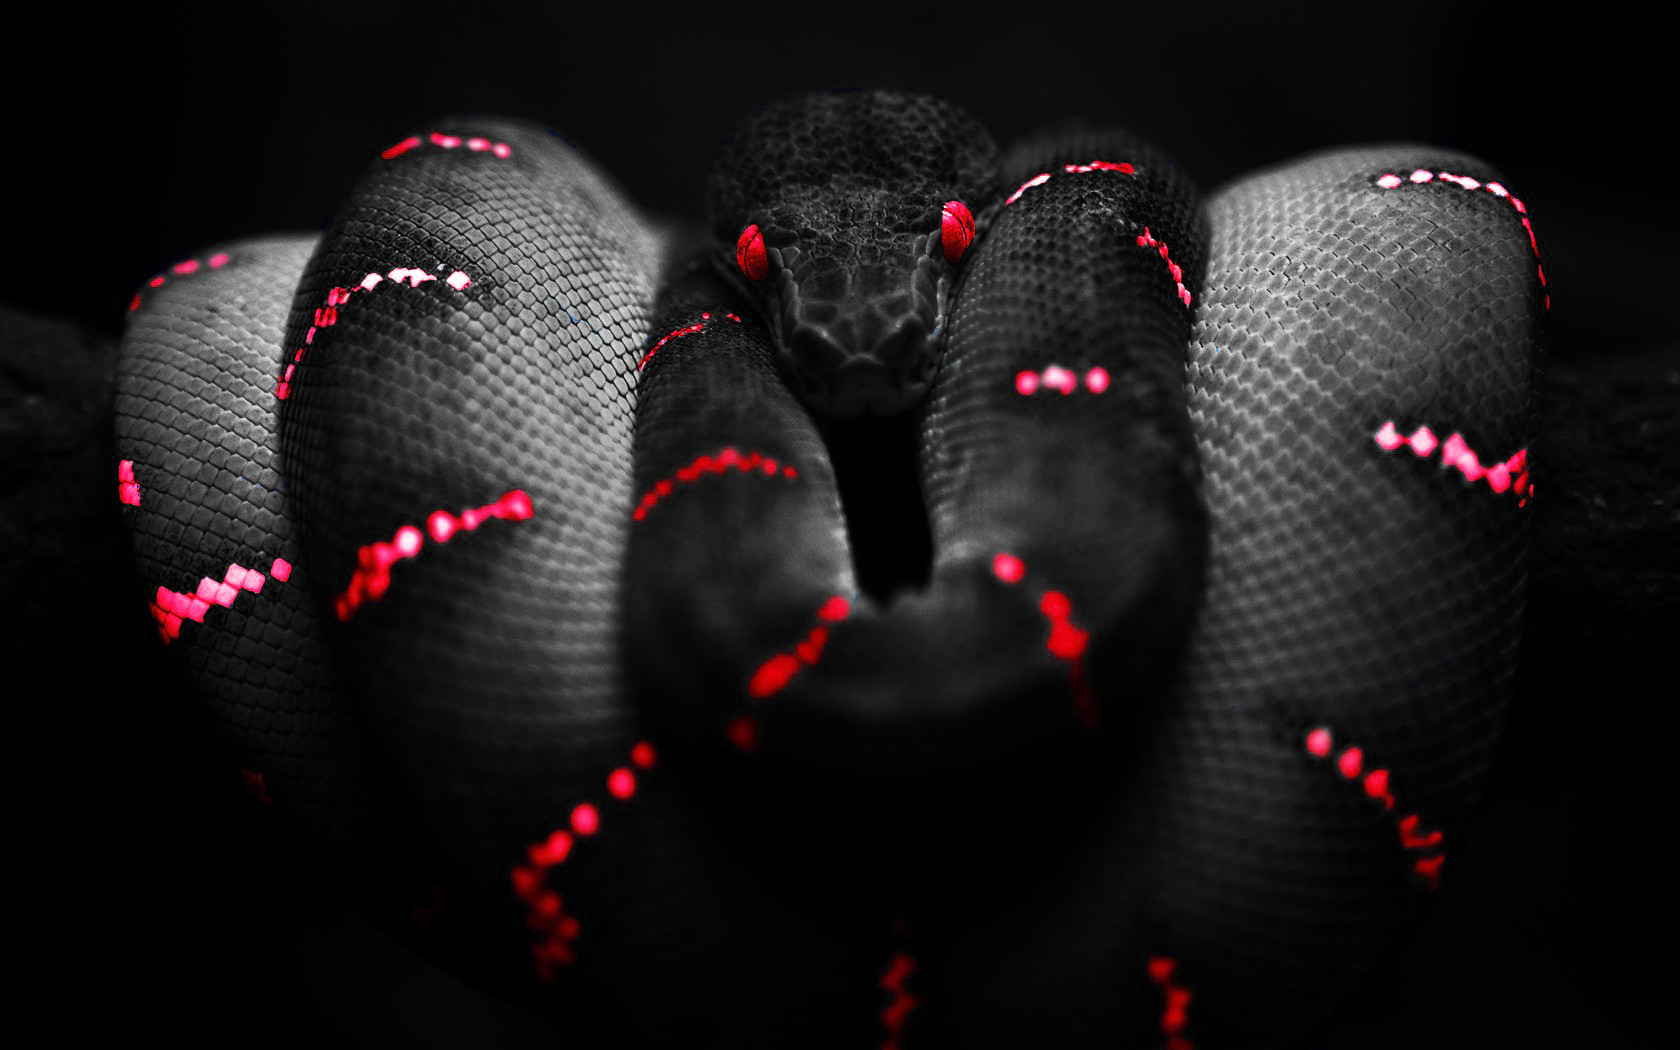 Snake Selective Coloring Boa Constrictor Red Red Eyes 1680x1050